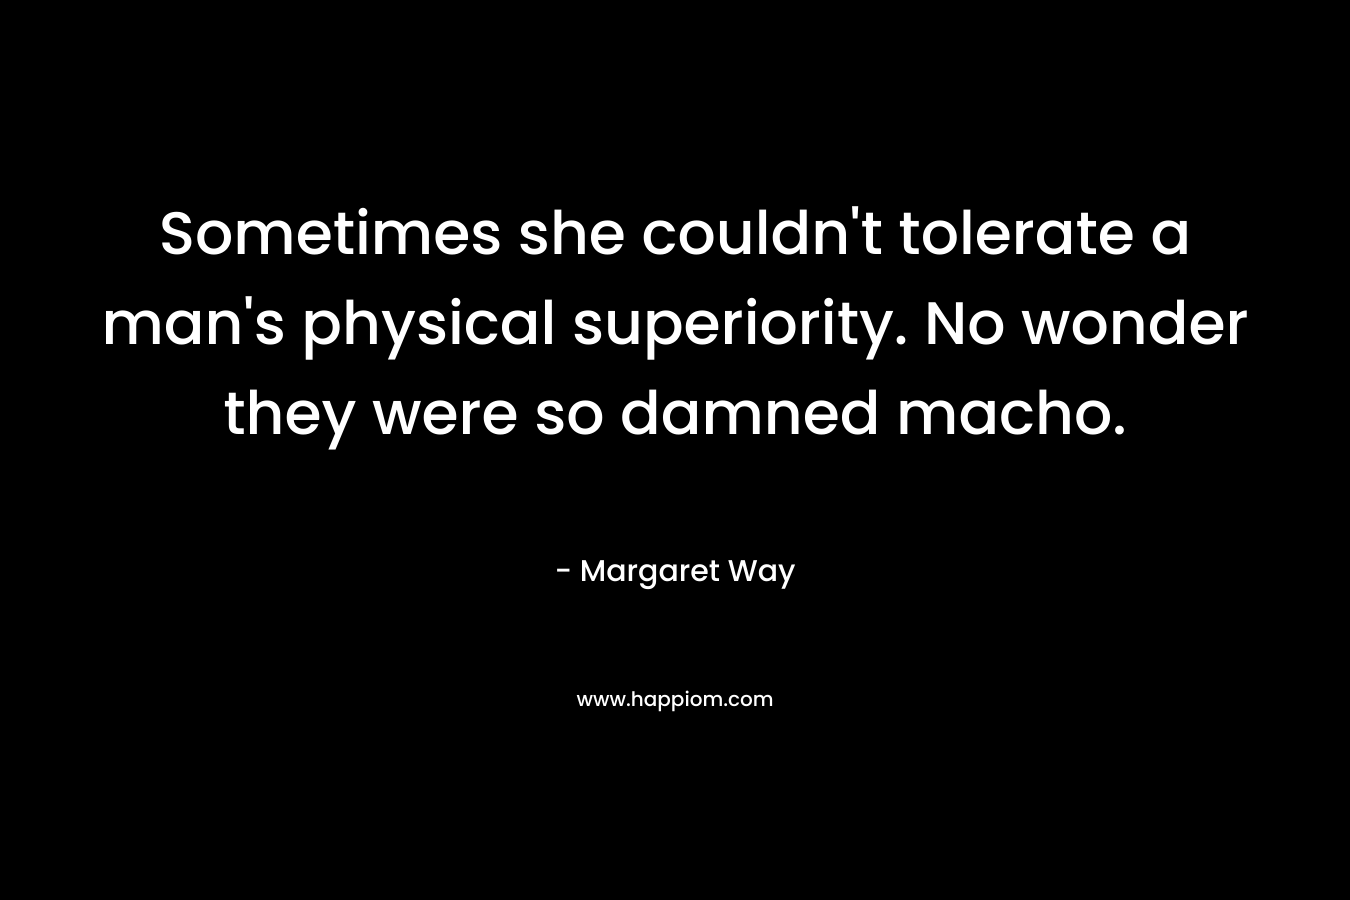 Sometimes she couldn’t tolerate a man’s physical superiority. No wonder they were so damned macho. – Margaret Way